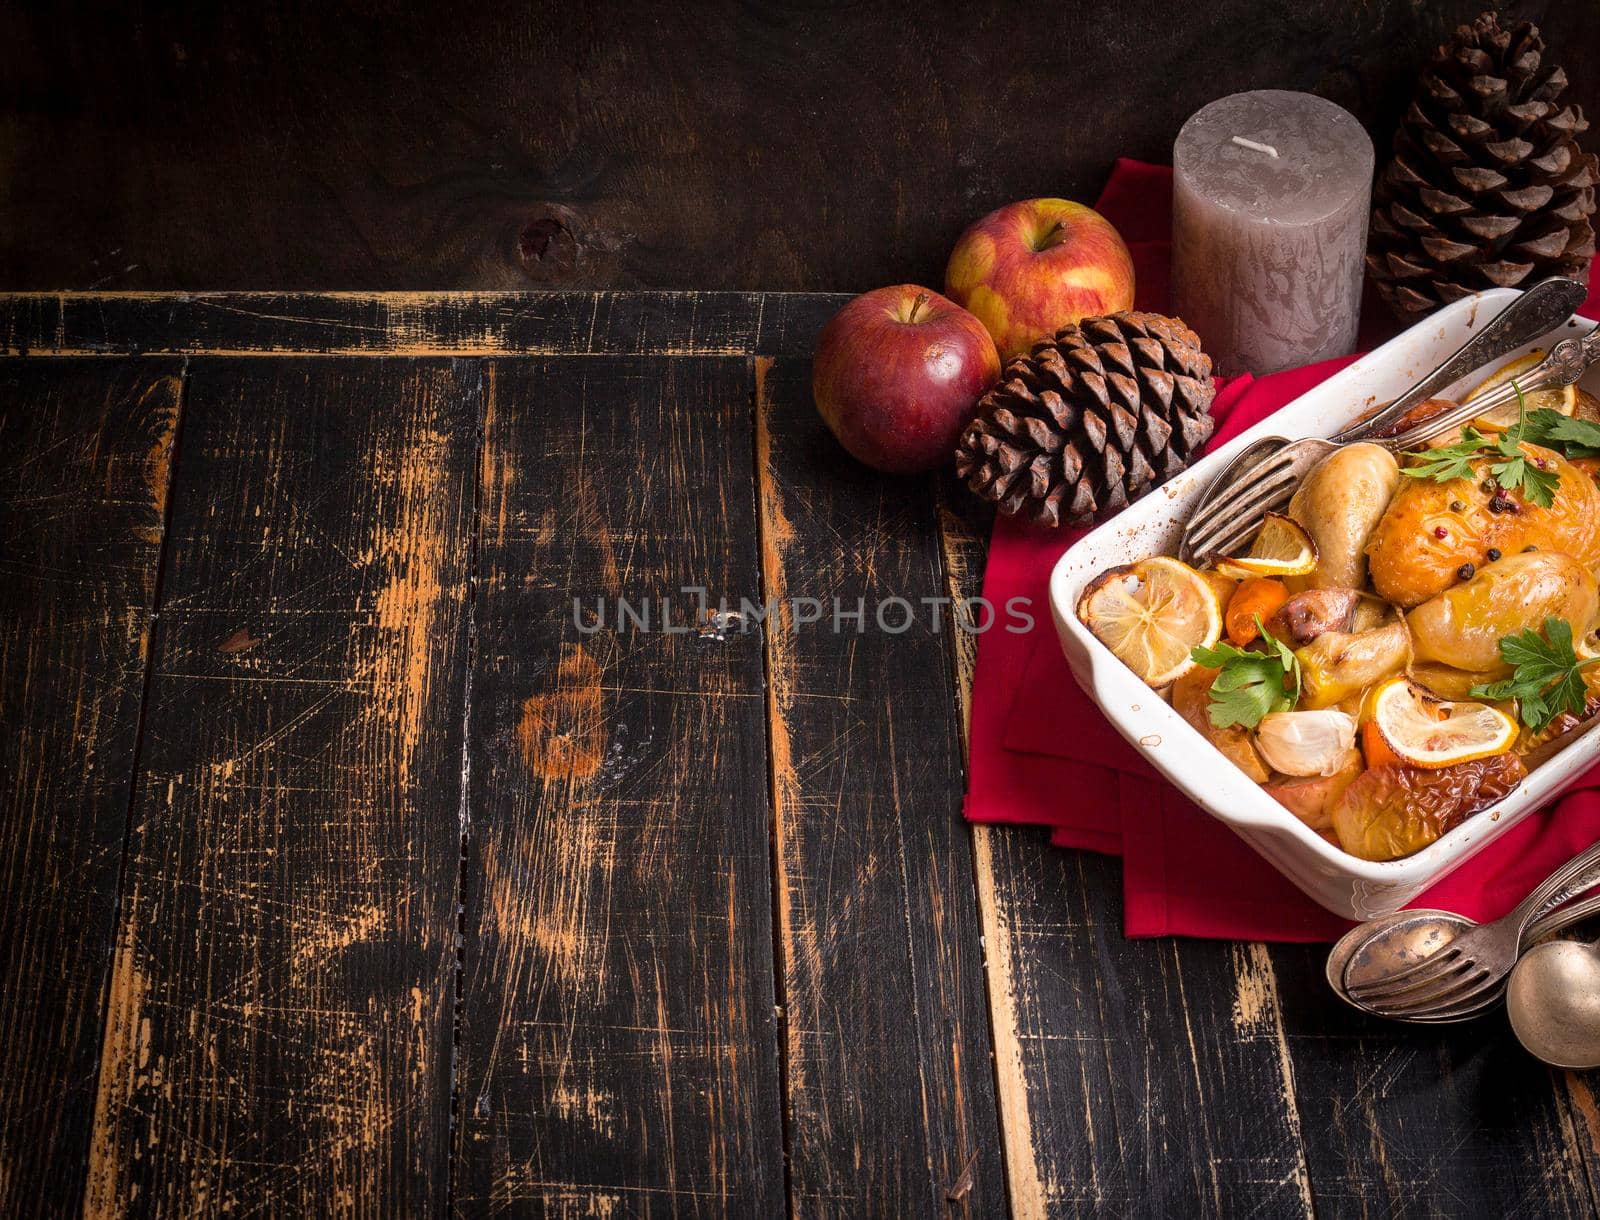 Roasted chicken. Christmas food background. Rustic celebration table with roasted chicken, vegetables, apples, decorated with candles, vintage cutlery. Christmas/Thanksgiving dinner. Space for text